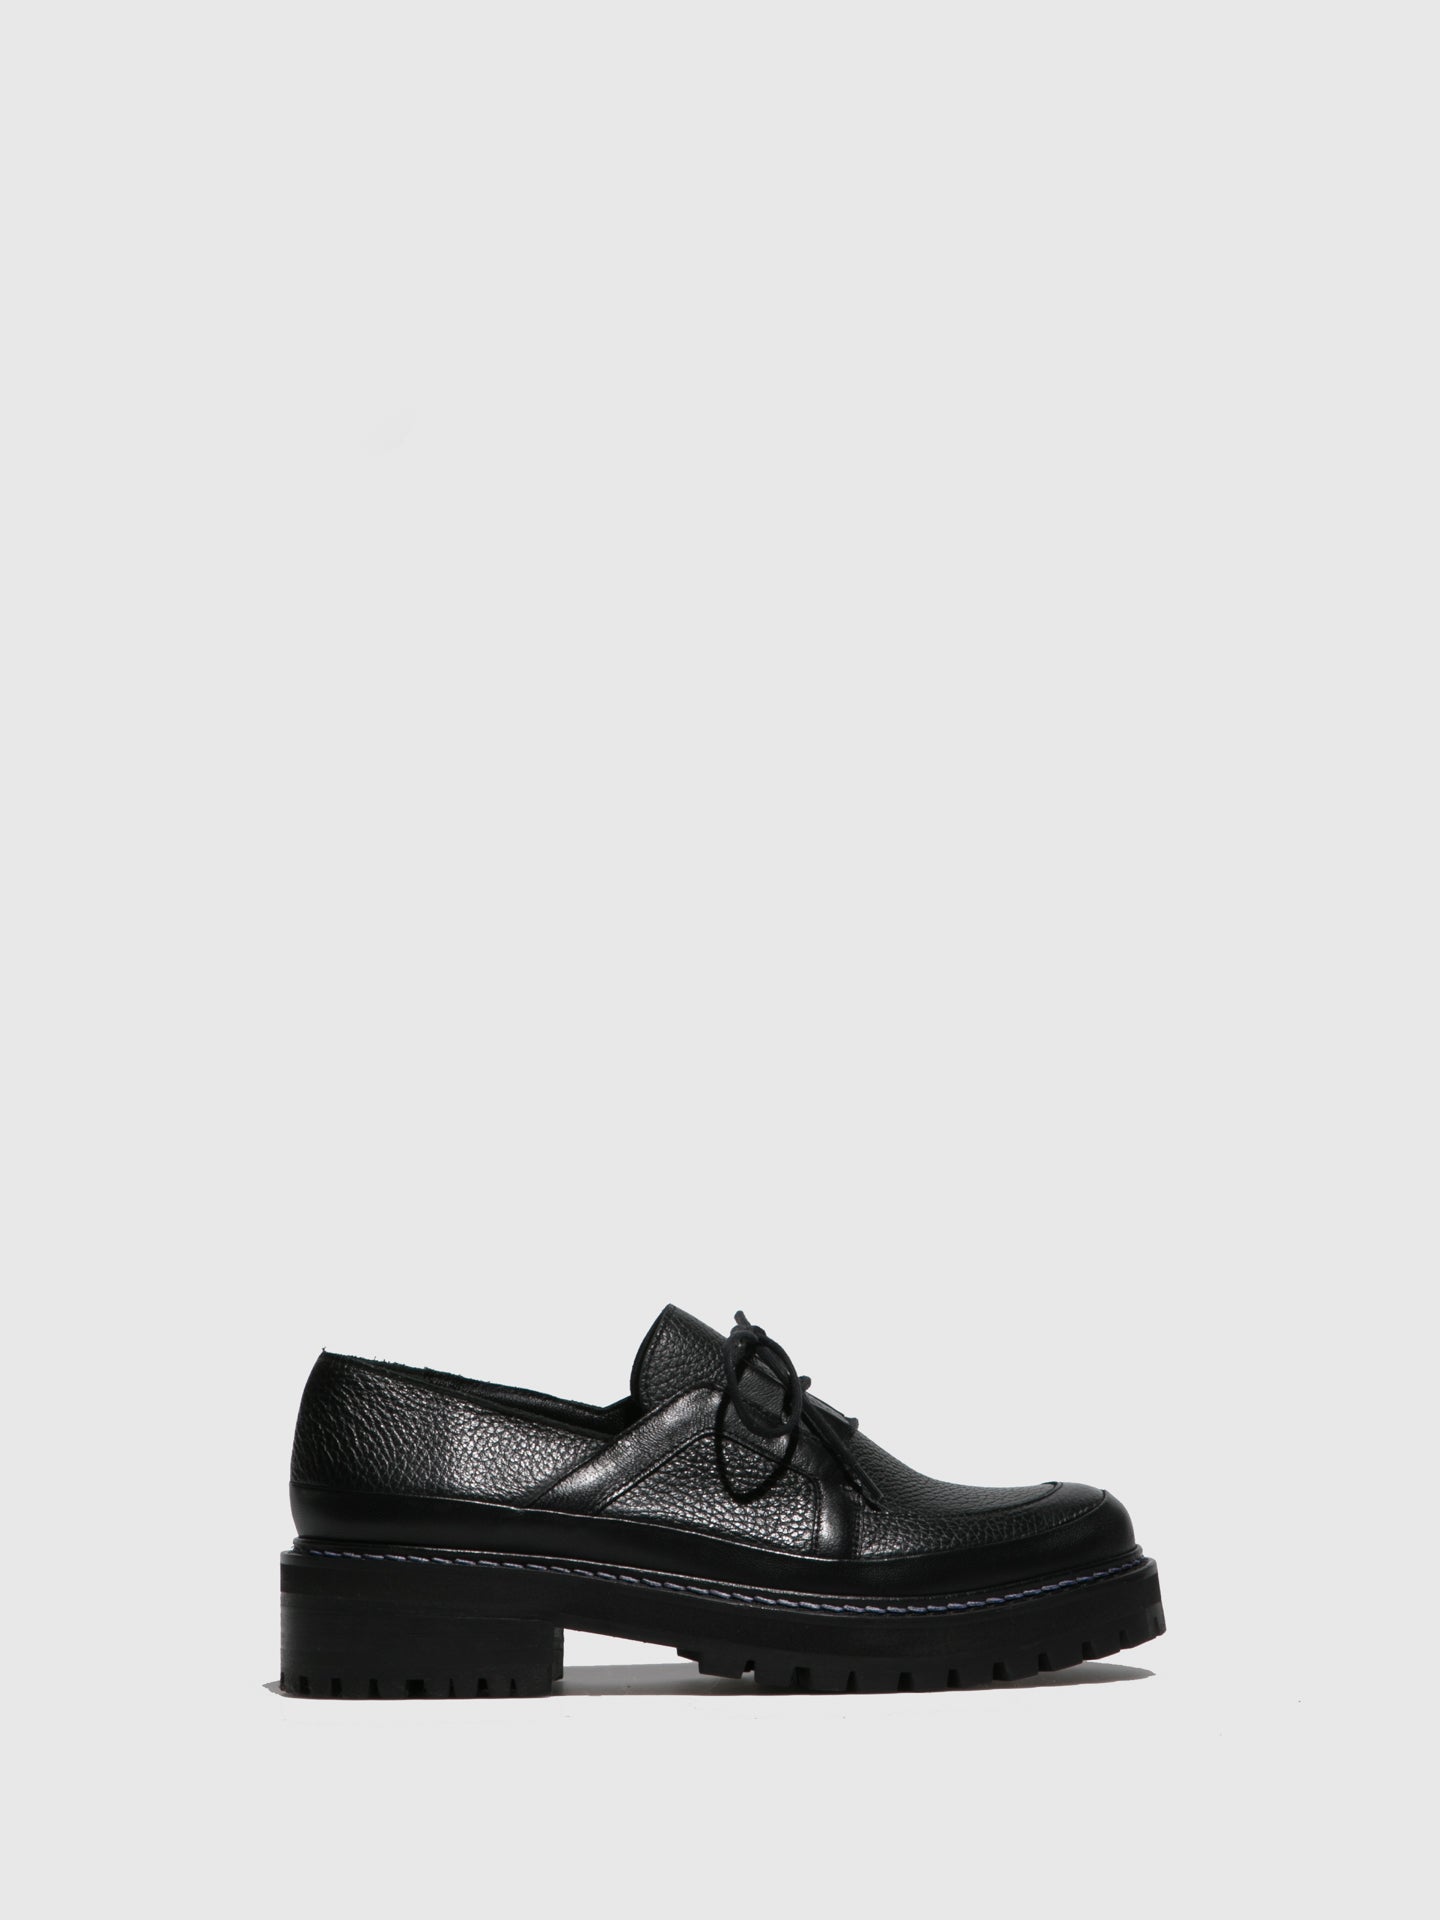 JJ Heitor Black Lace-up Loafers